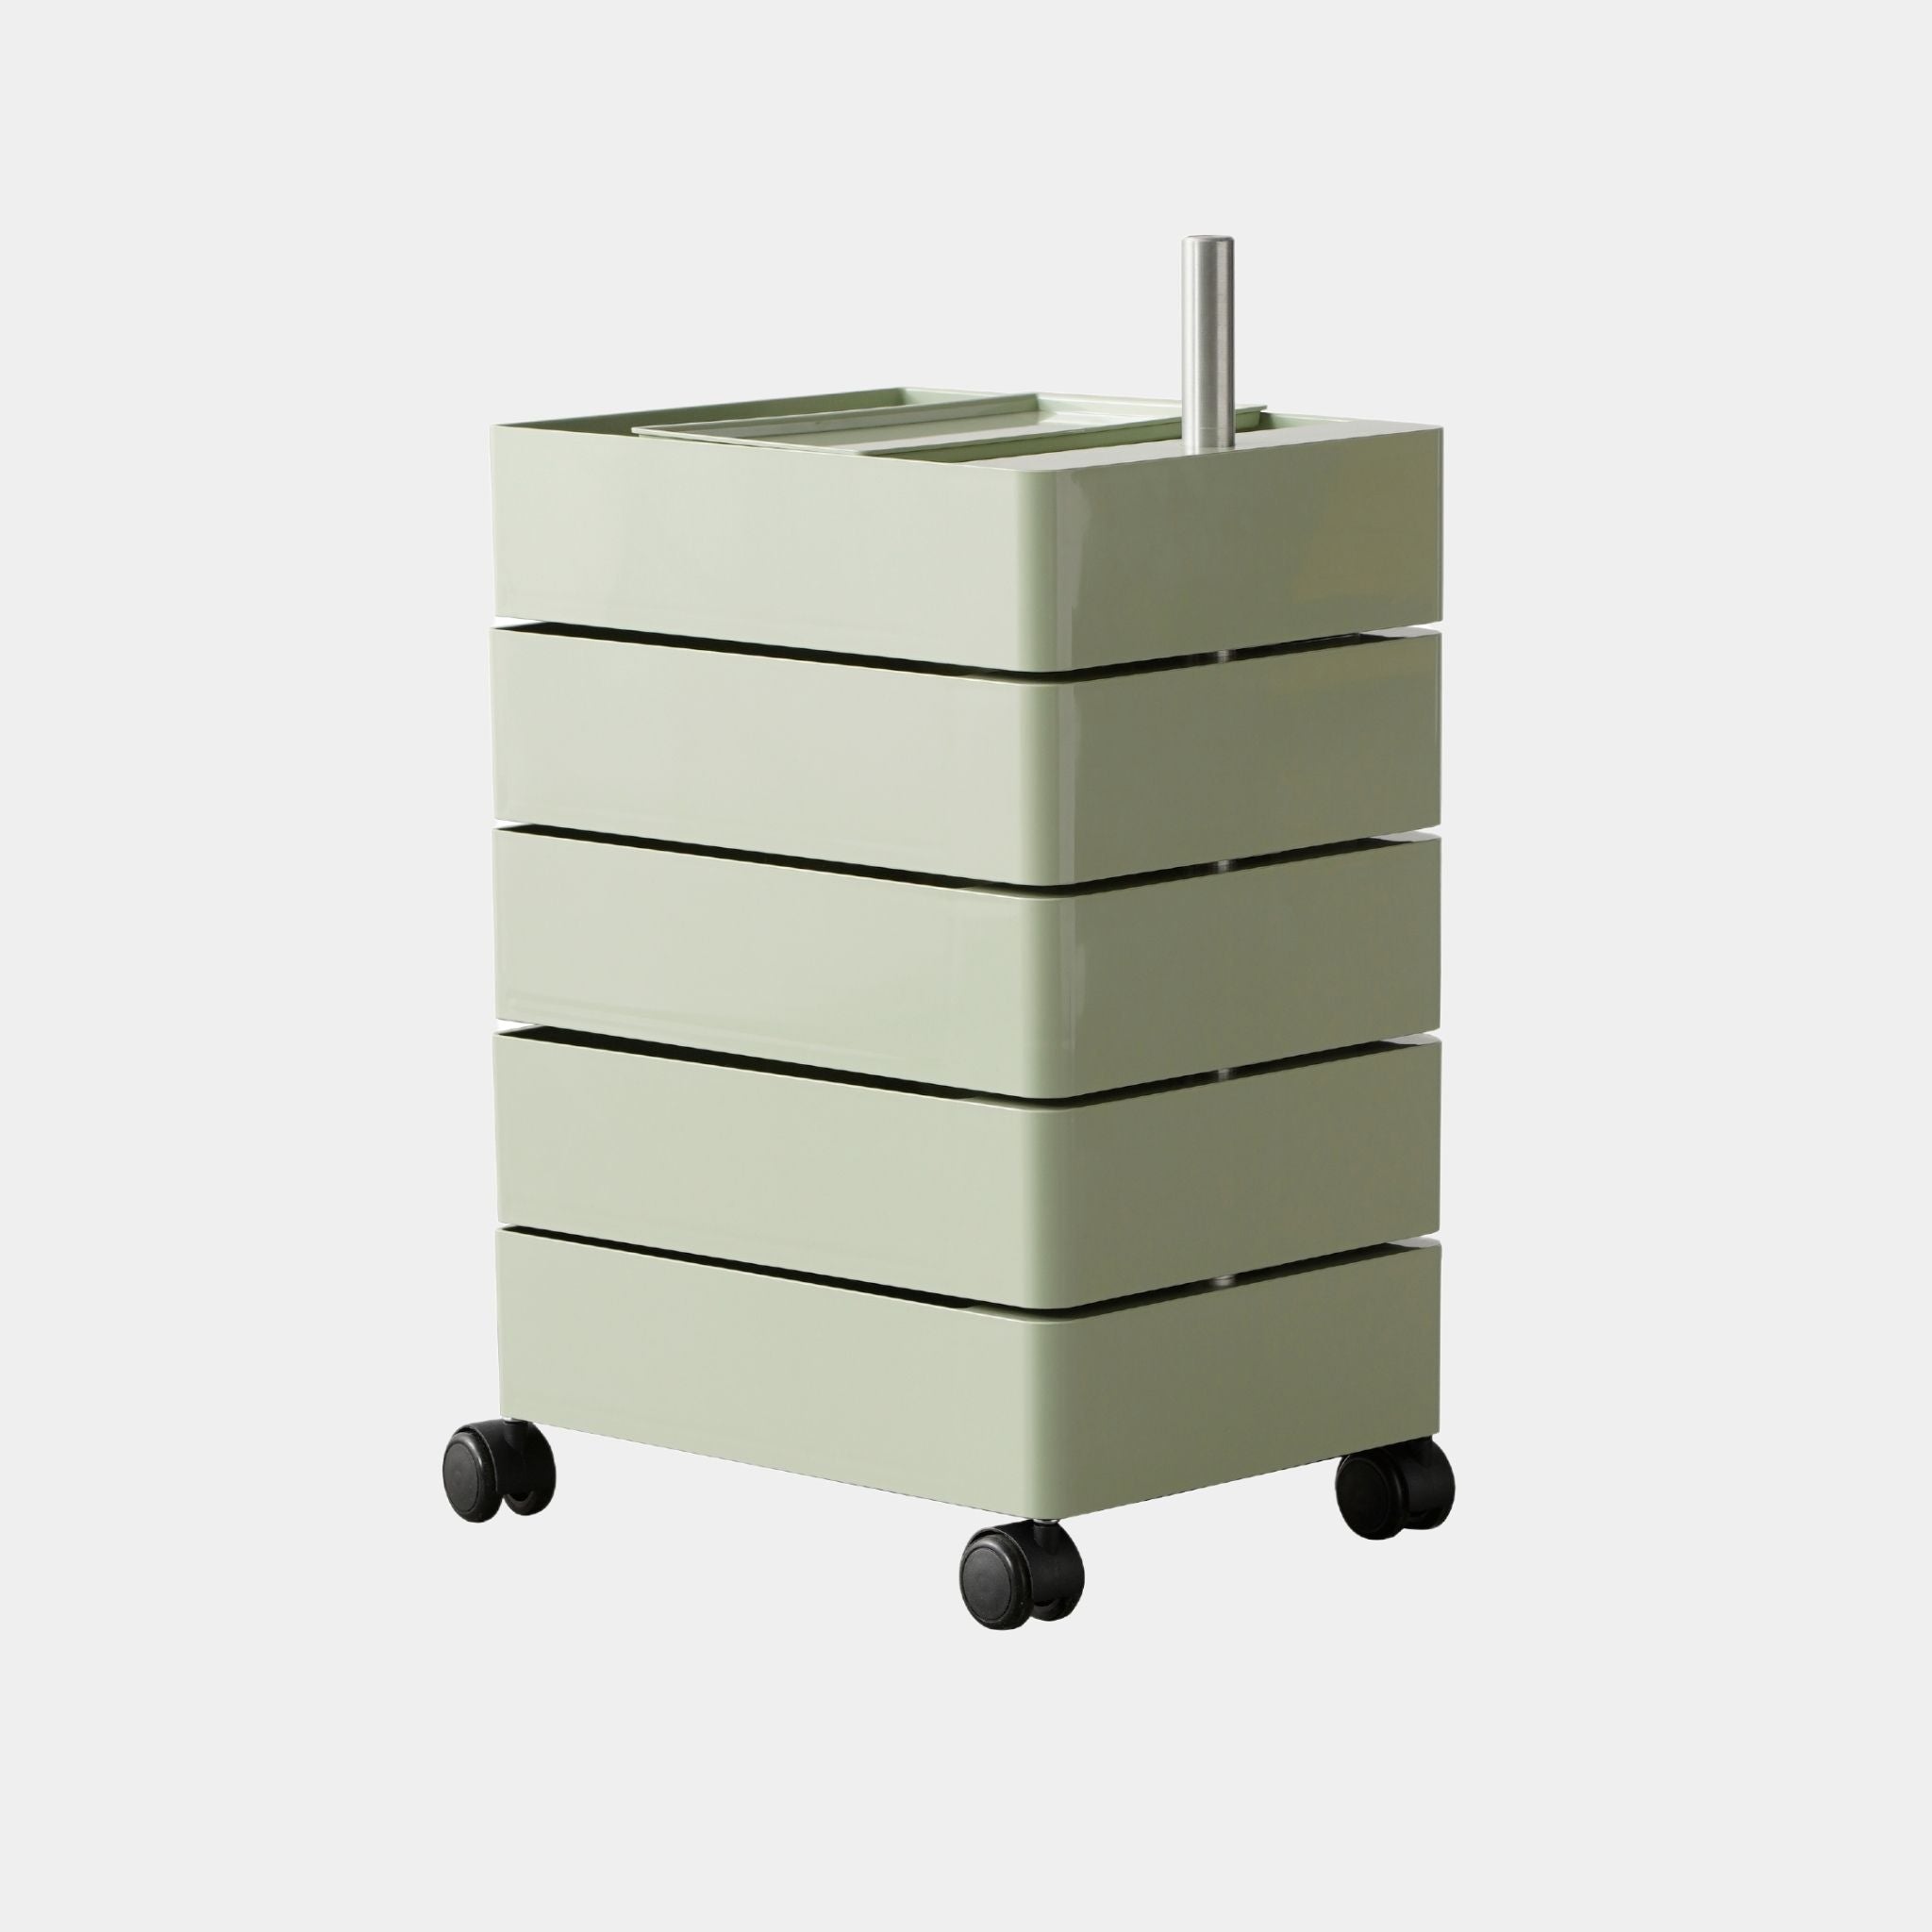 Joe Colombo Boby Trolley Replica 360° storage drawer unit on wheels made from moulded colourful ABS plastic